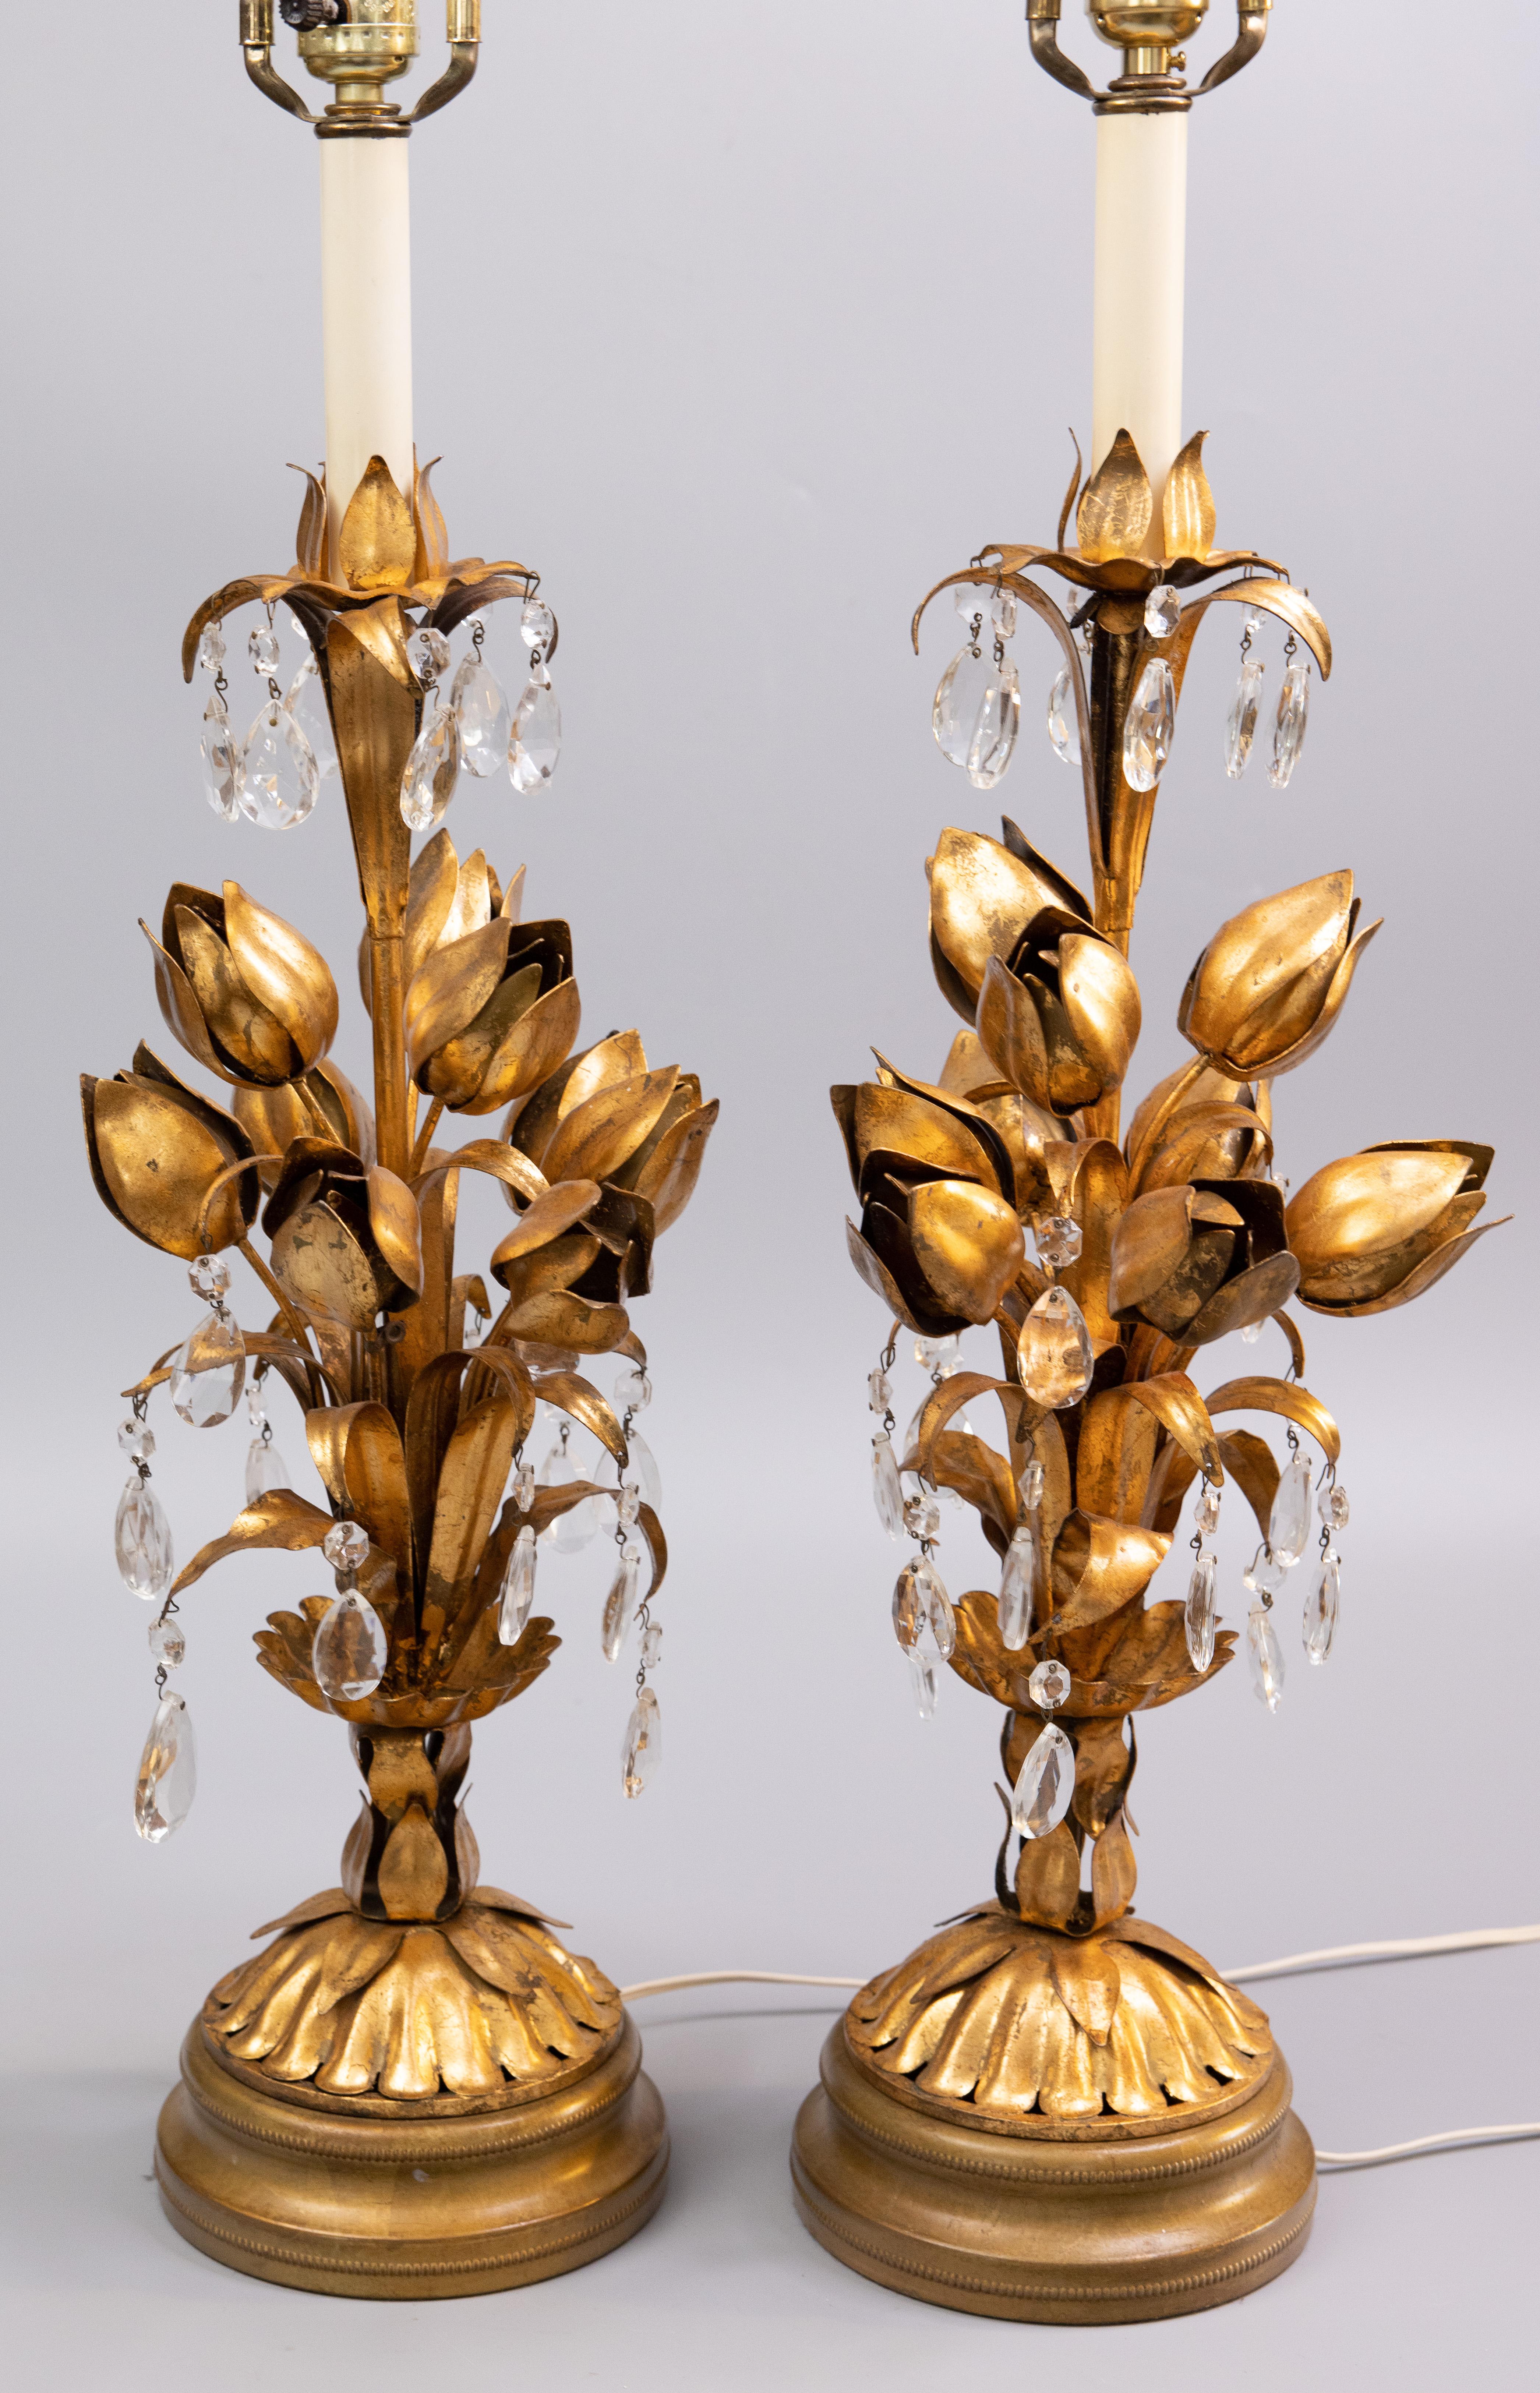 A fabulous pair of tall Mid-Century Italian Florentine gilt tole and crystals lamps. These gorgeous gilded lamps are a nice large size with a beautiful floral design, scrolling leaves, teardrop crystals, and lovely original surface and patina. They